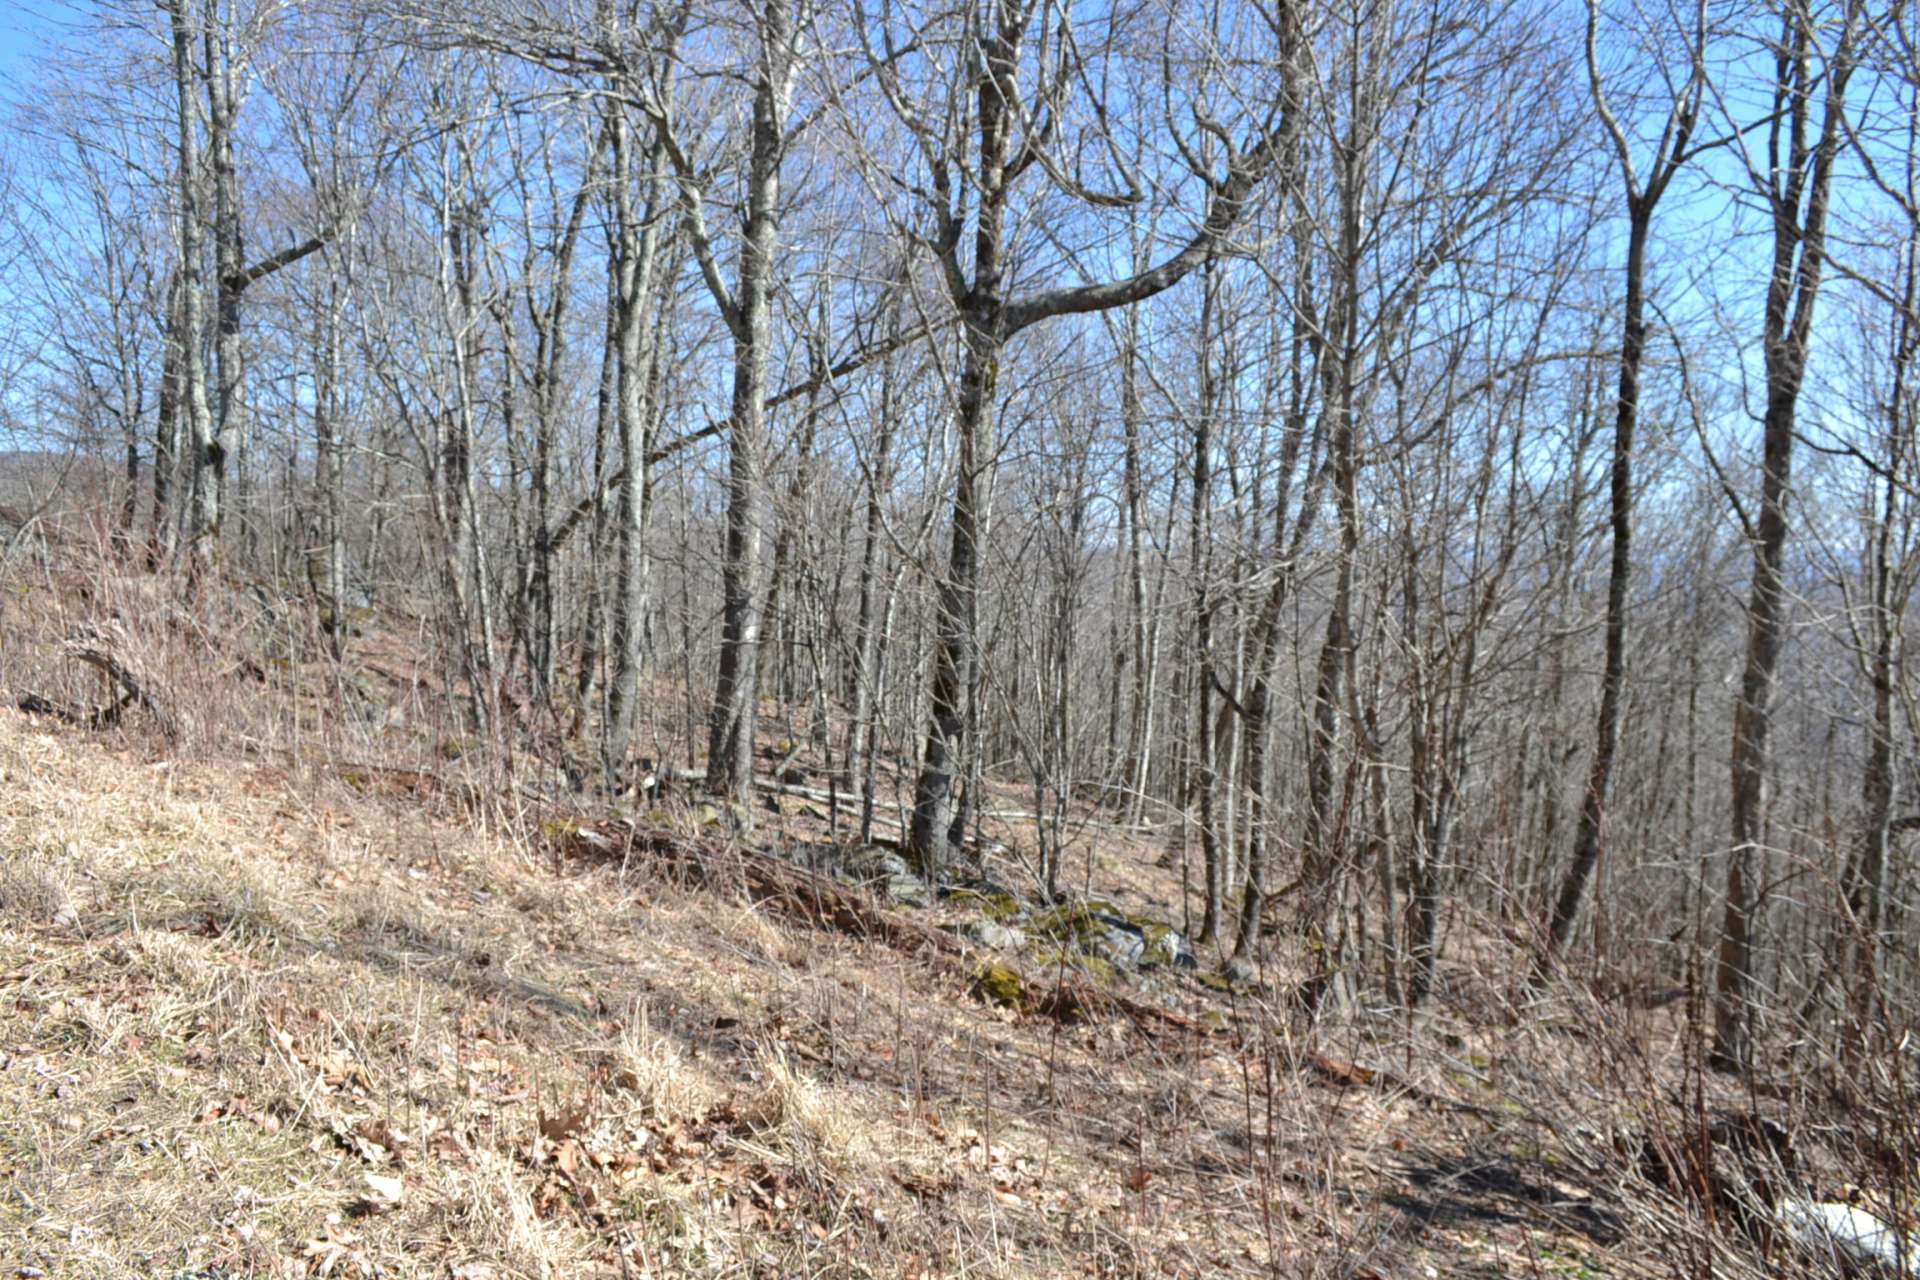 Your Whitetop Mountain cabin or home will look great placed on this home site.